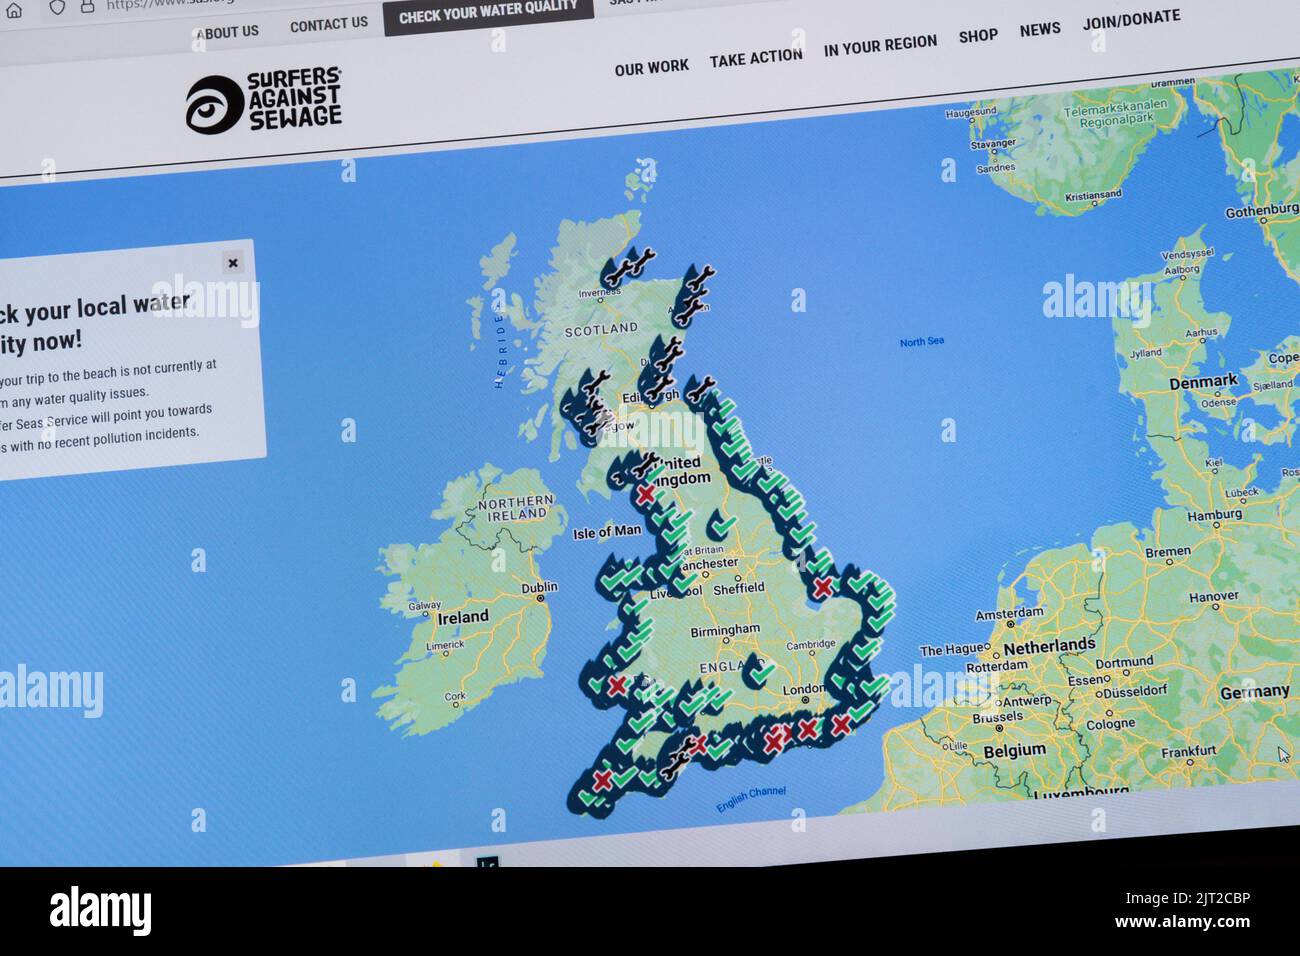 The home page of the Surfers Against Sewage website shows a map of water quality around the British Isles. Stock Photo